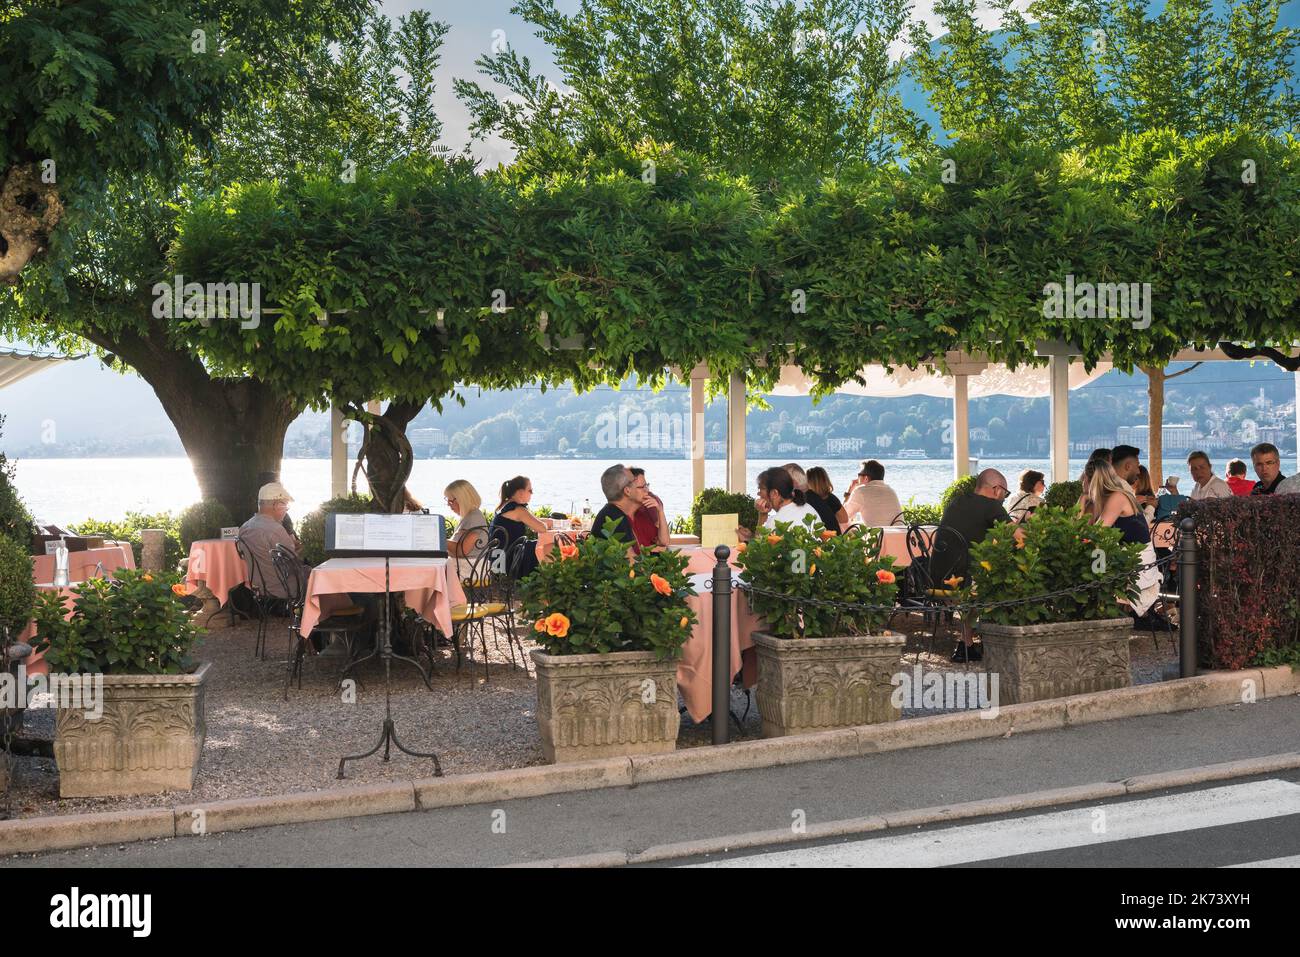 Bellagio Italy restaurant, view in summer of people relaxing on the terrace of a lakeside restaurant in the Piazza Mazzini in Bellagio, Lake Como Stock Photo